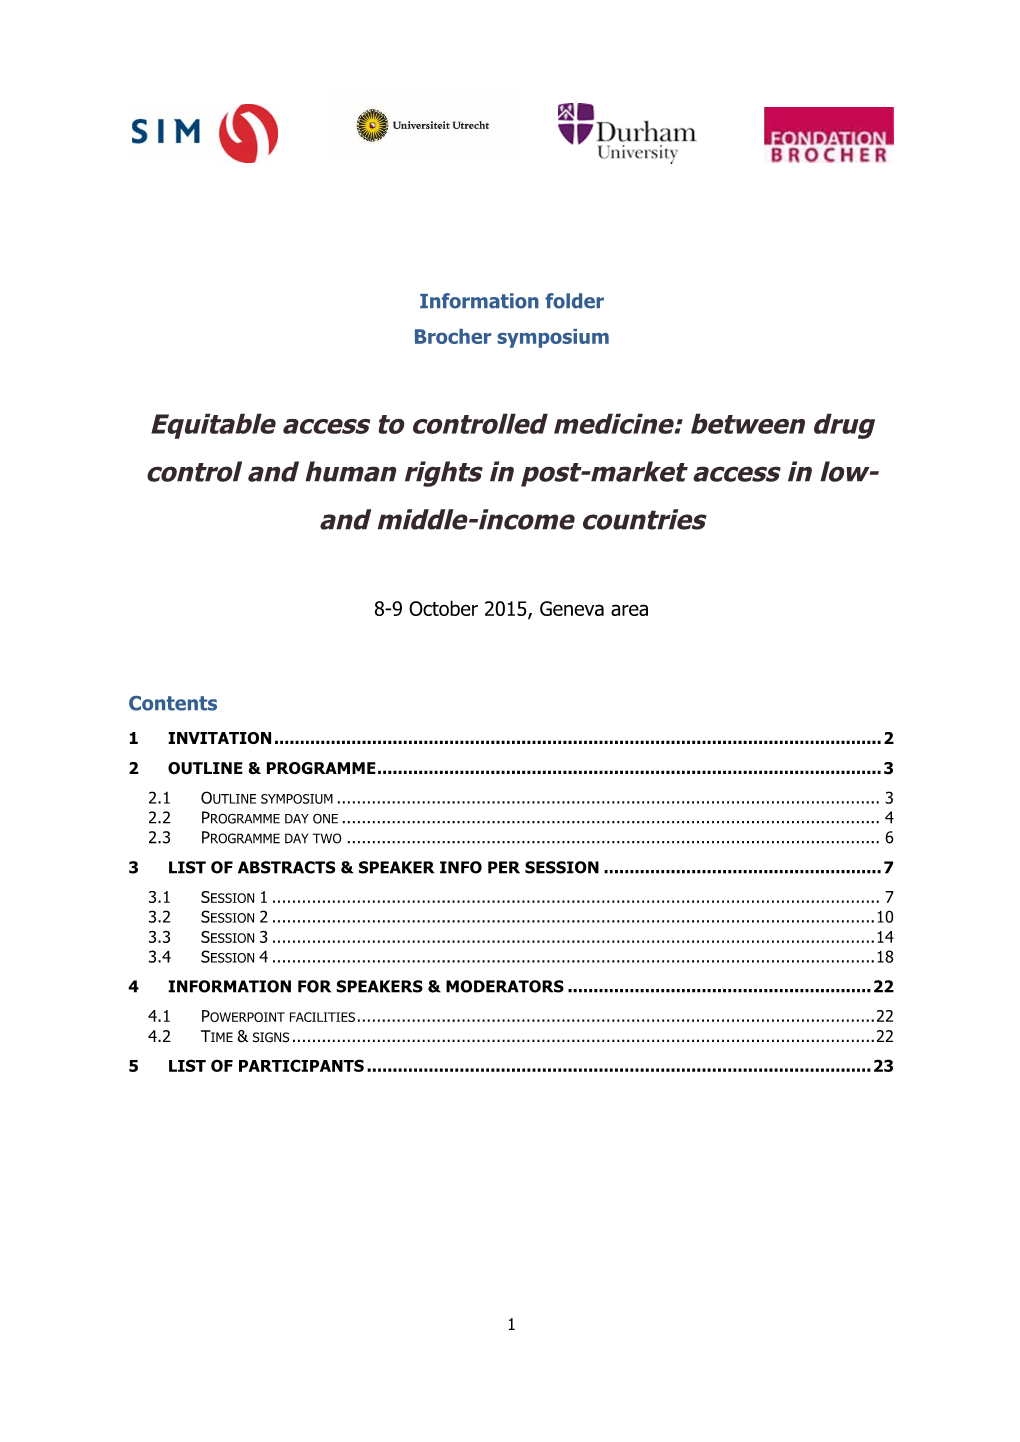 Between Drug Control and Human Rights in Post-Market Access in Low- and Middle-Income Countries